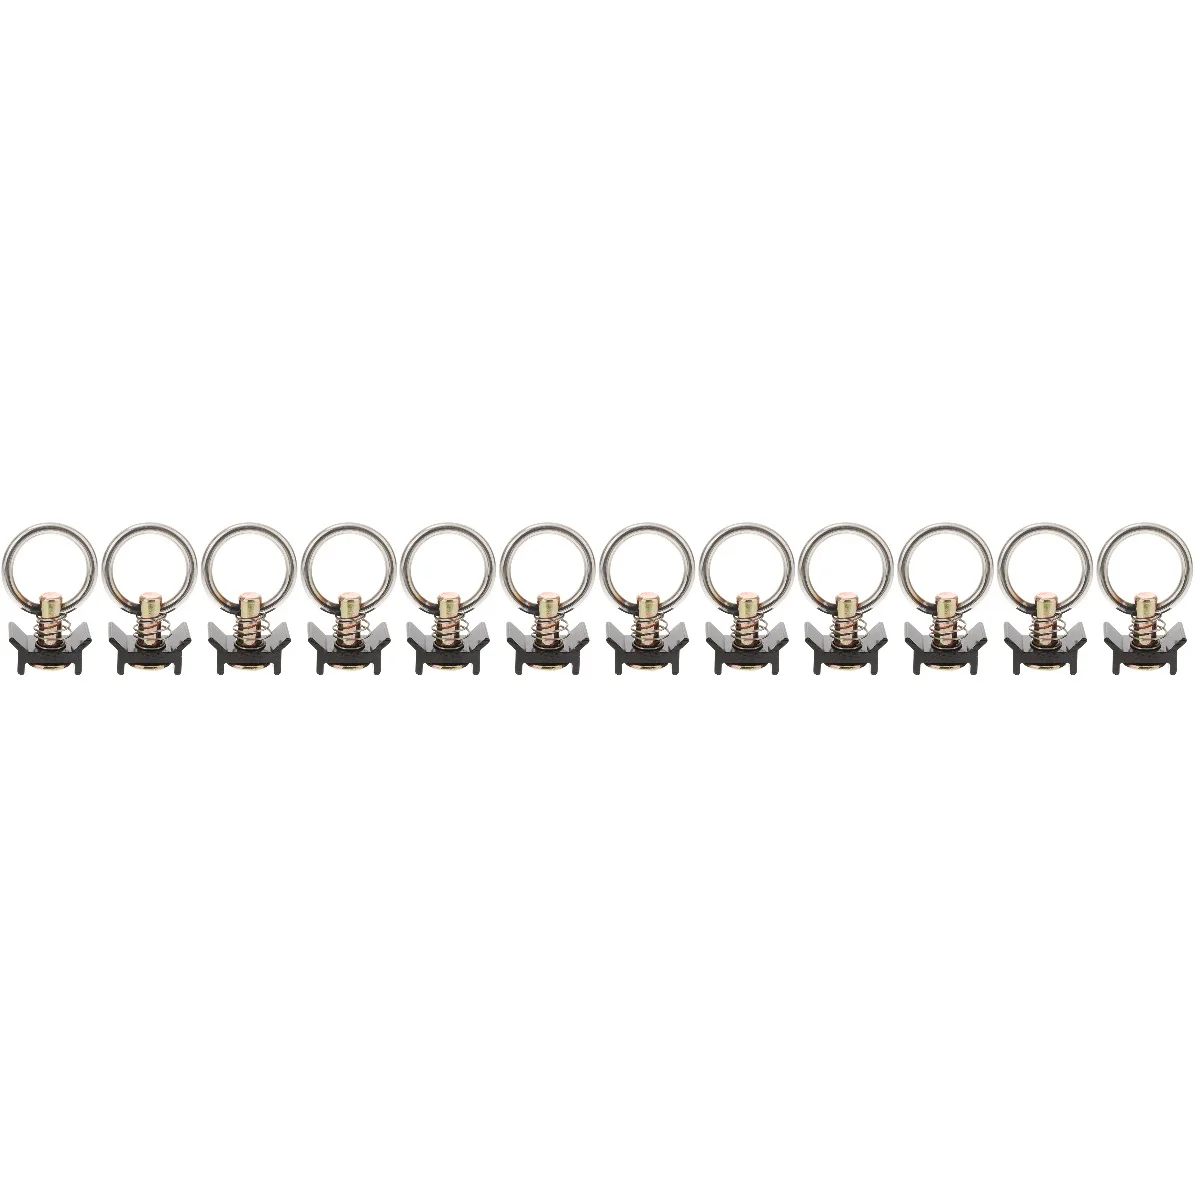 

12 Pcs E Track Accessories L Rails Rings Stainless Steel Studs Cargo Control Tie Downs Round Fitting Tie-down Anchor